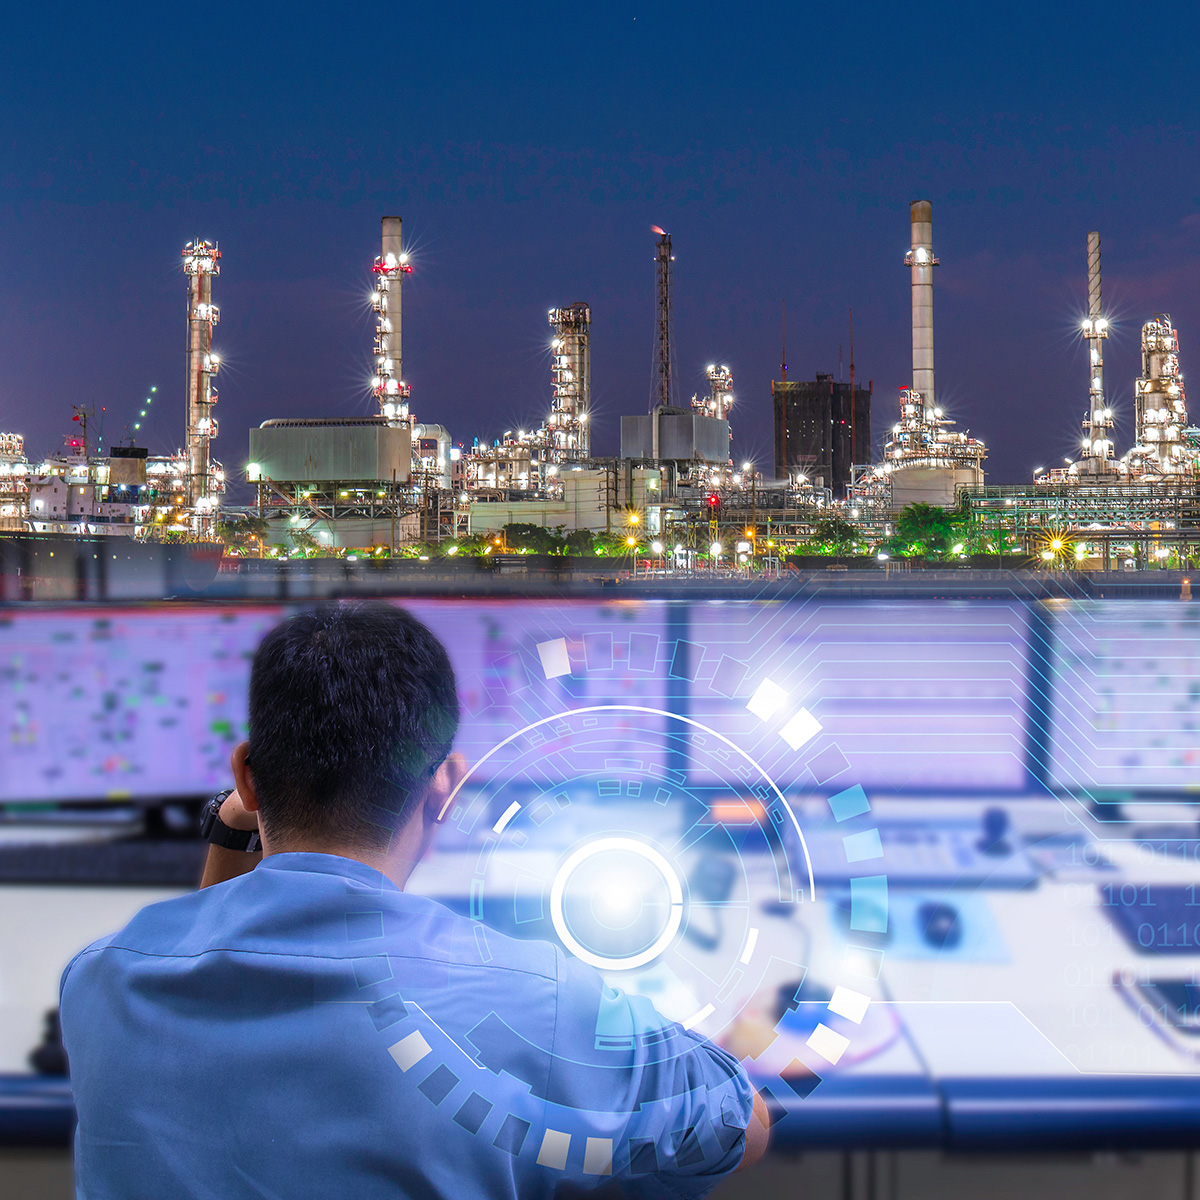 Person viewed from the back in a control room. Petroleum production plant in background.